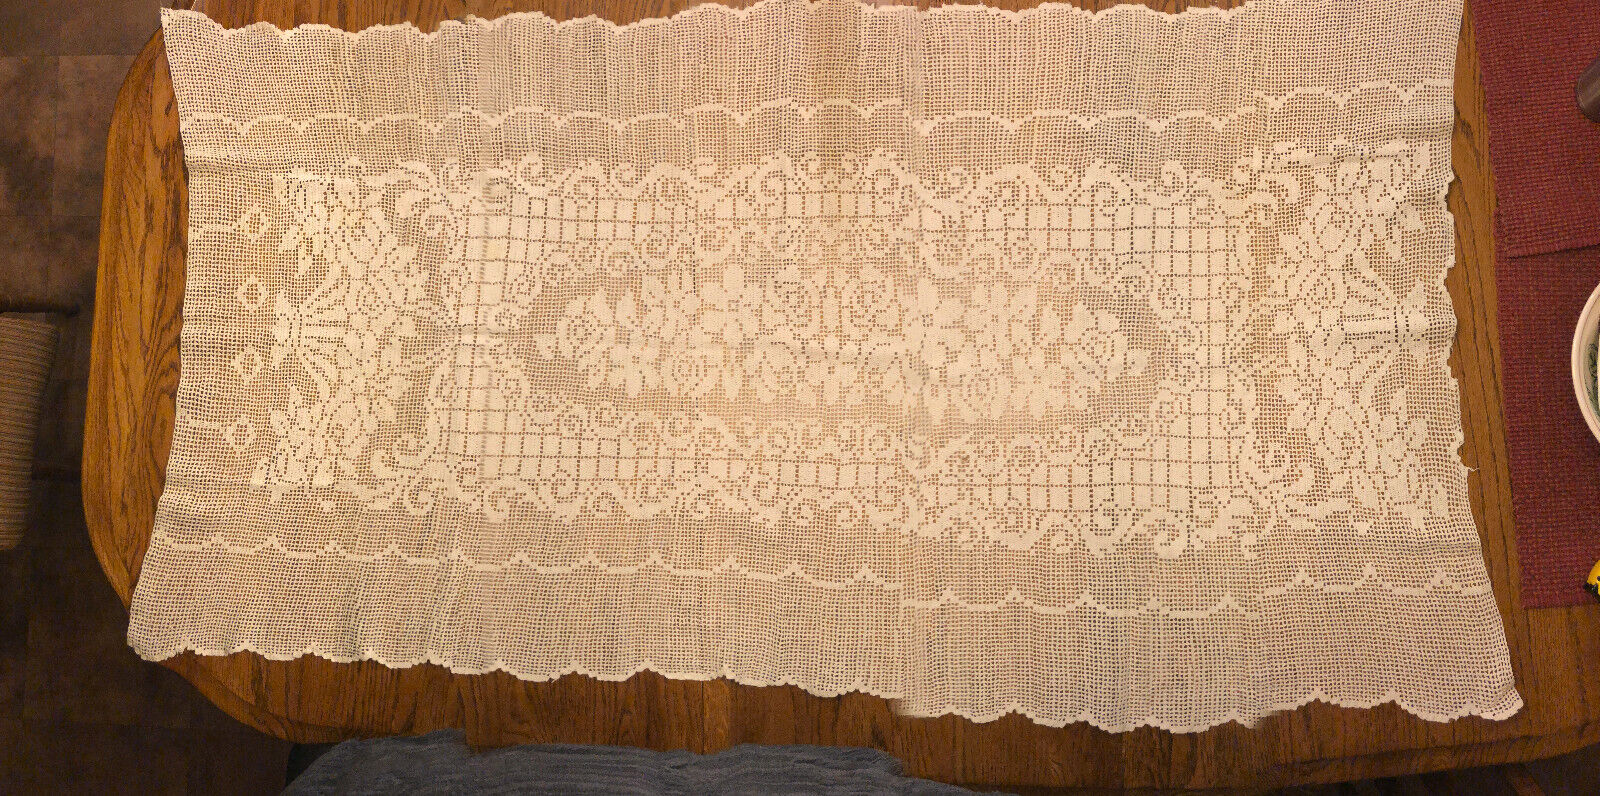 Vintage Crocheted Ecru Table Runner with a Floral Design - Beautiful